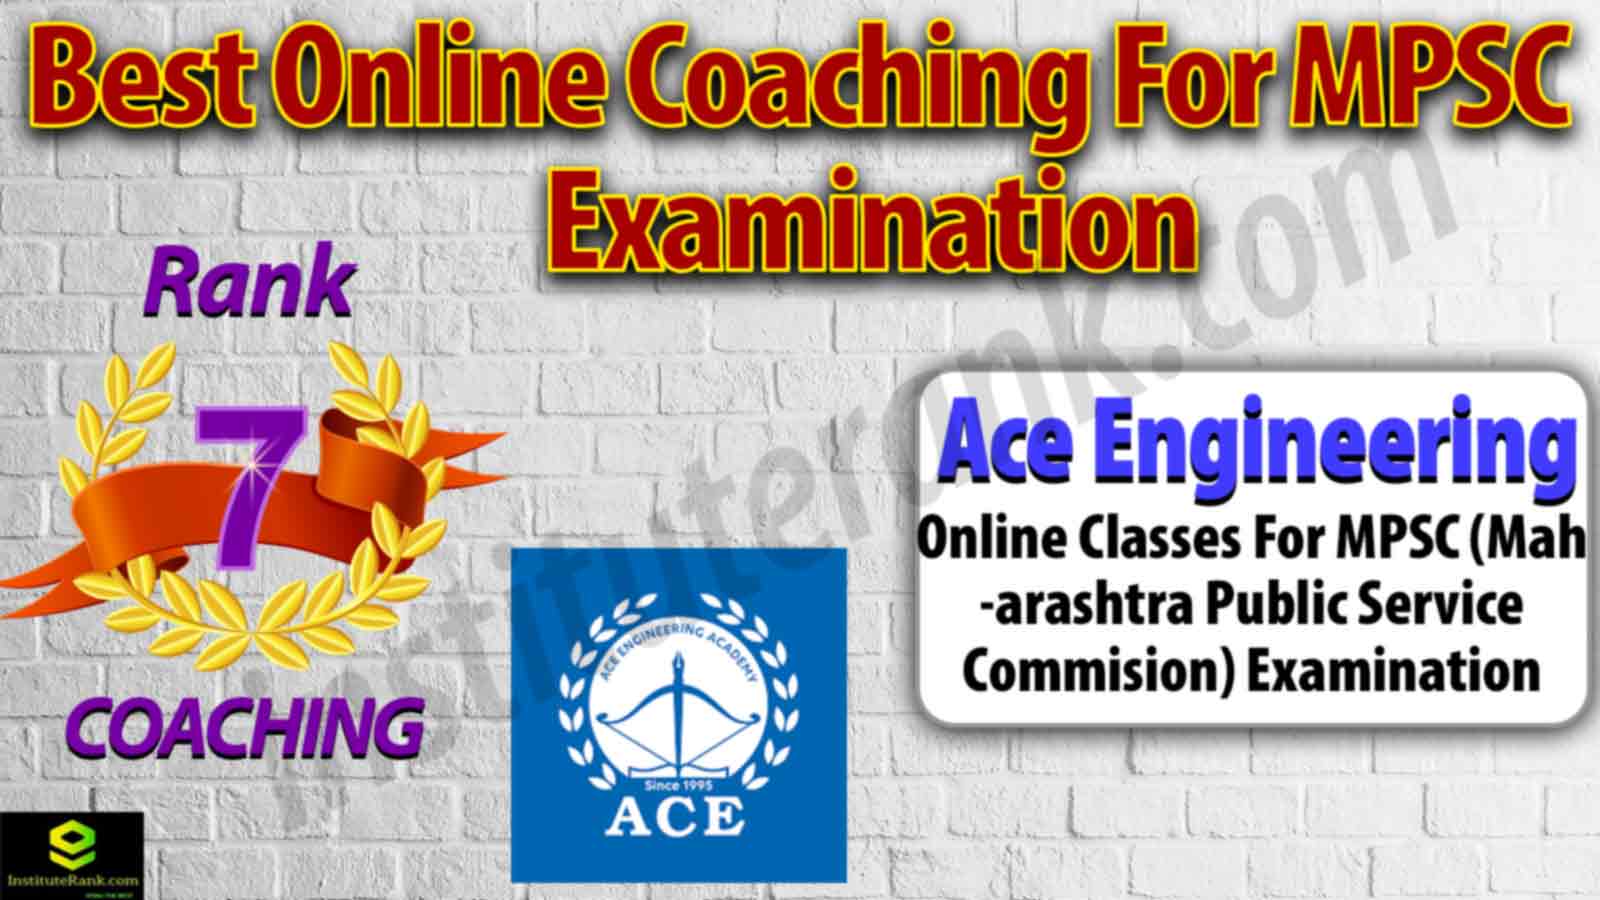 Online Coaching for MPSC Examination